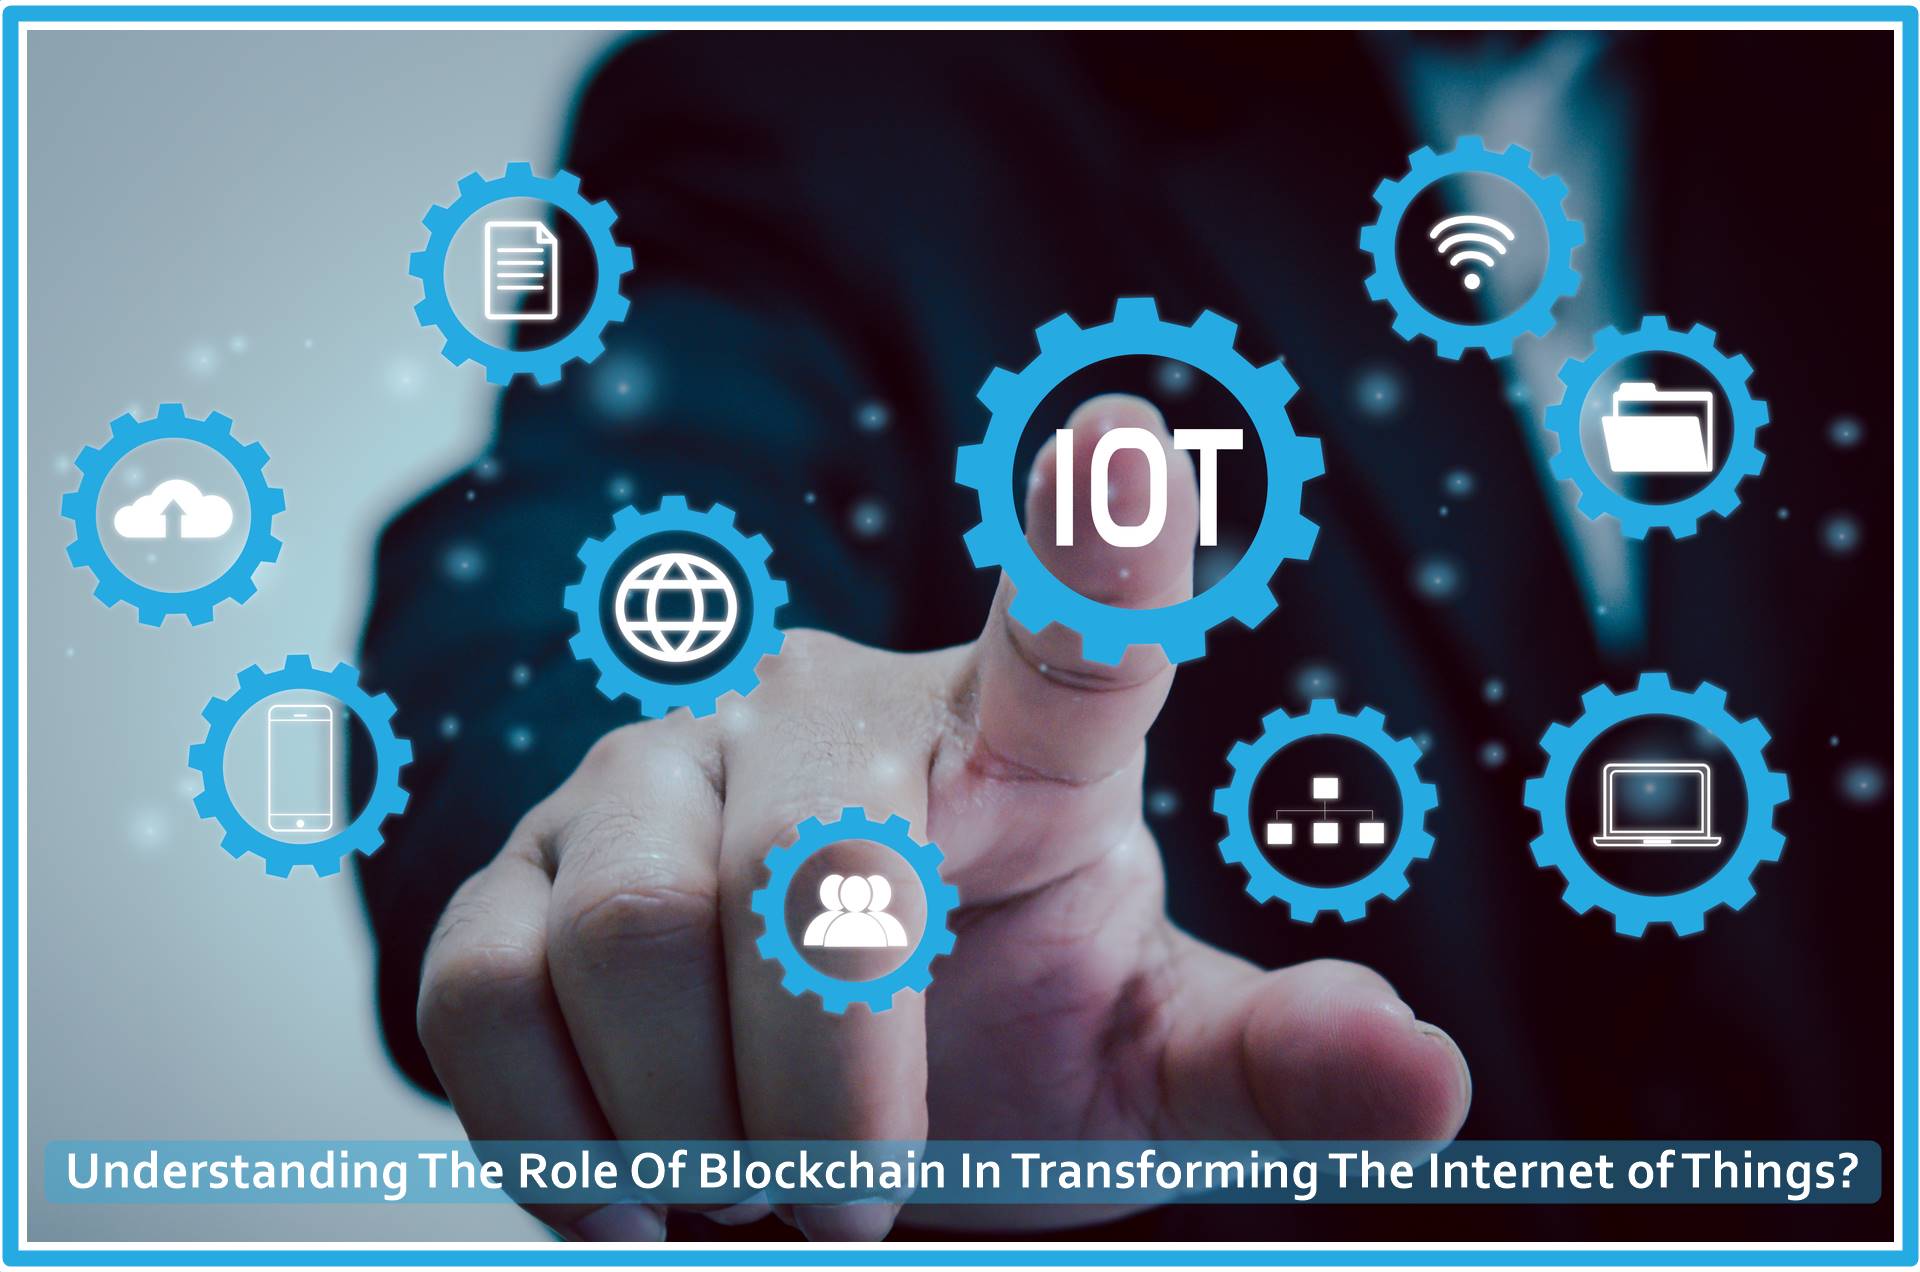 Understanding The Role Of Blockchain In Transforming The Internet of Things?